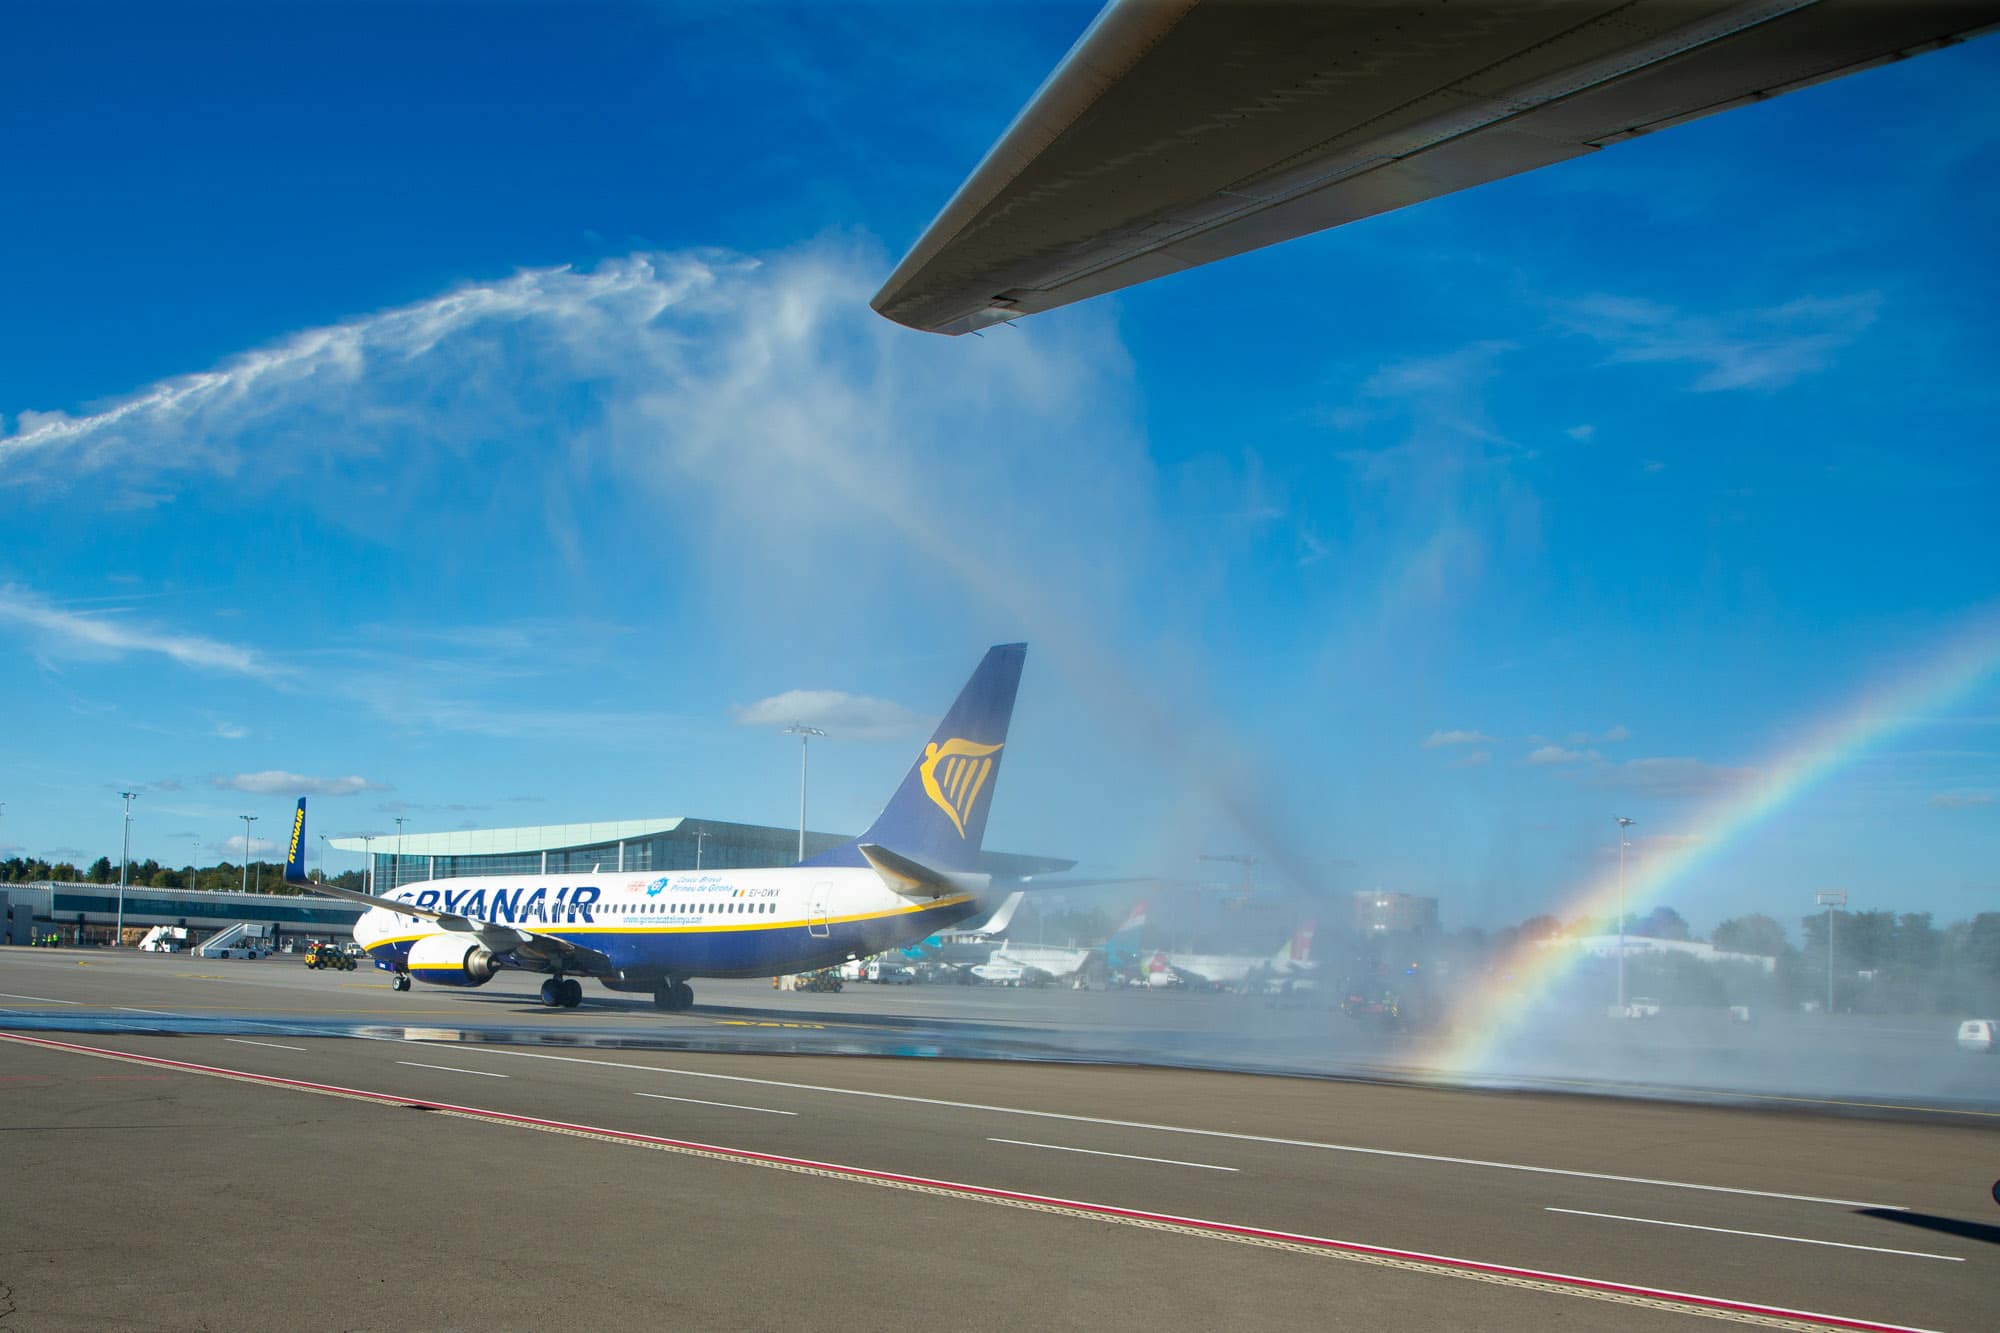 190903 First Flight Lux To Toulouse With Ryanair Aircraft And Terminal Watersalute Lr